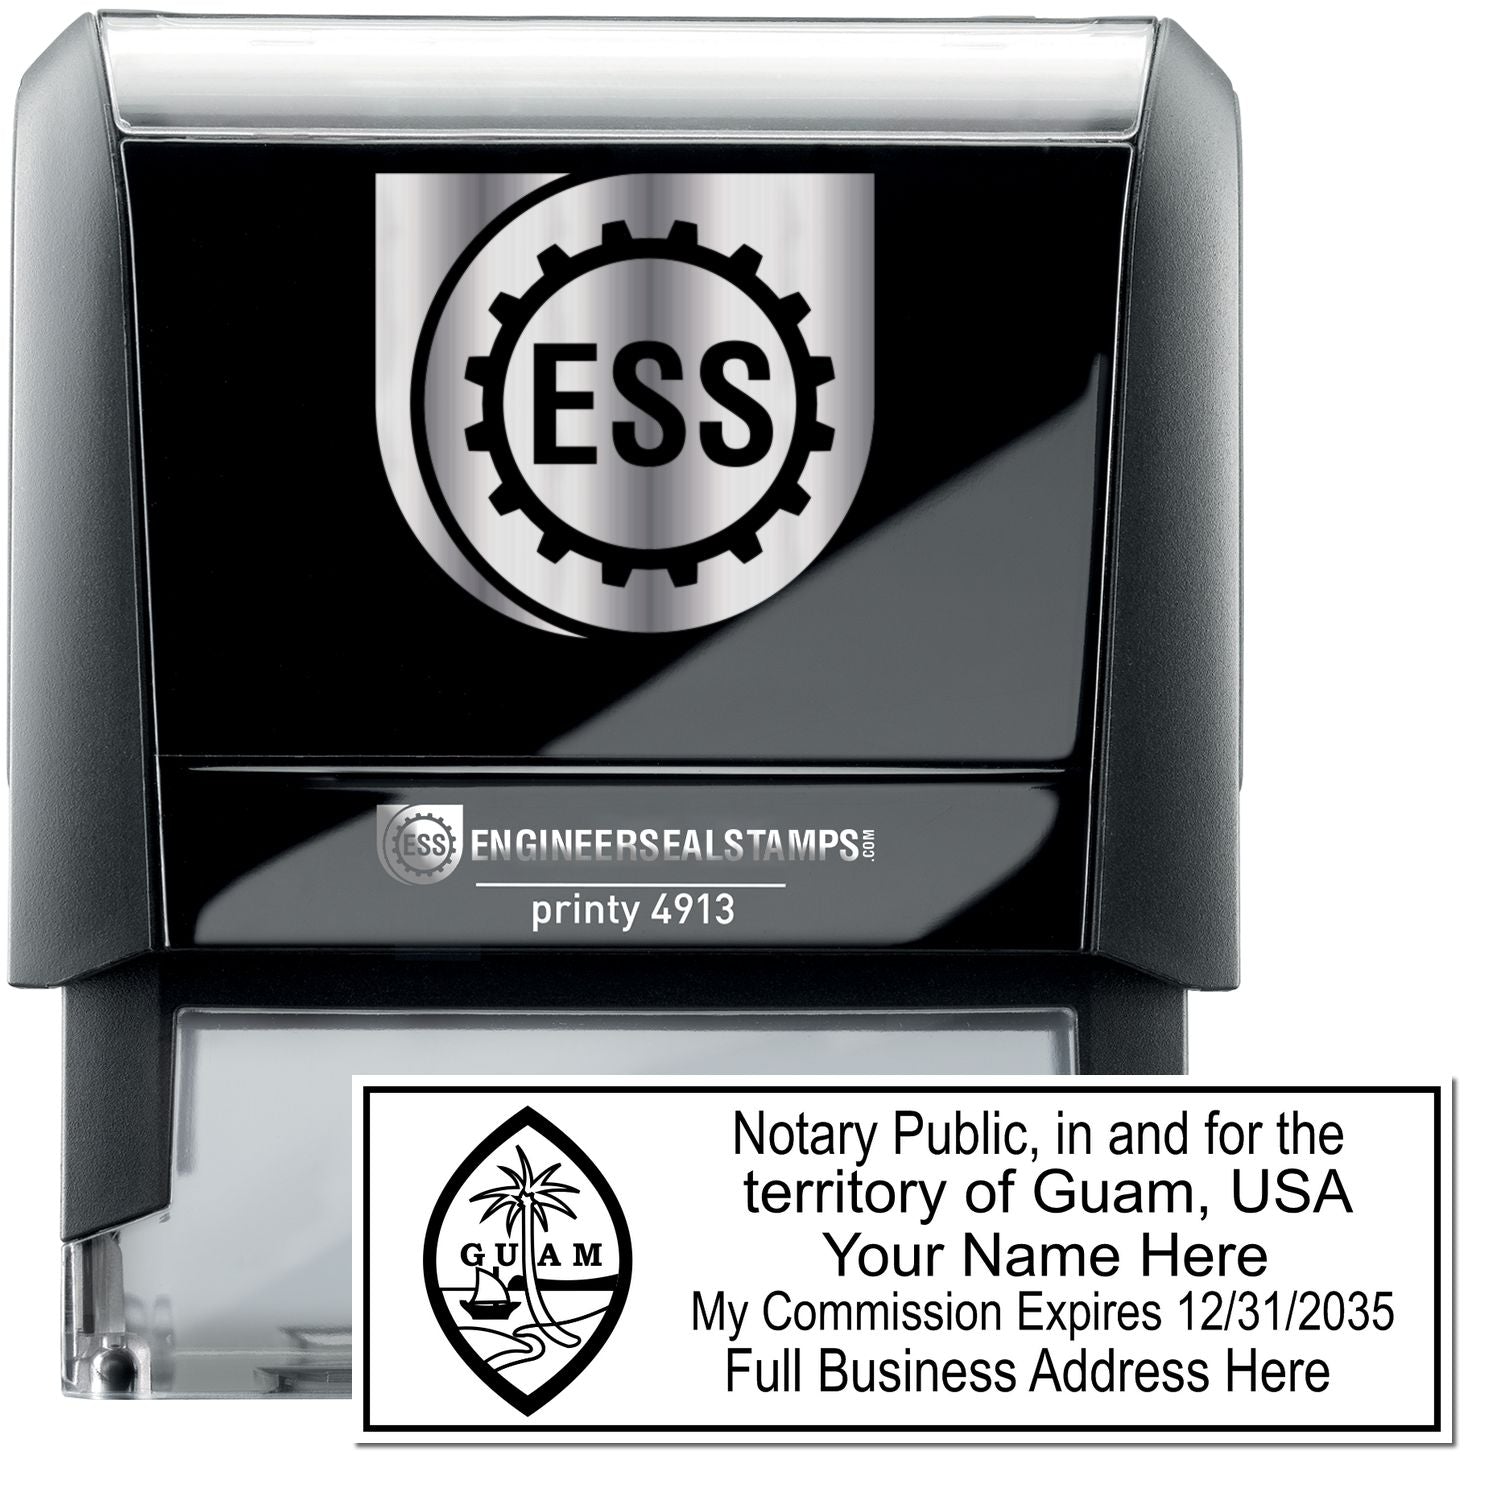 The main image for the Self-Inking Rectangular Guam Notary Stamp depicting a sample of the imprint and electronic files